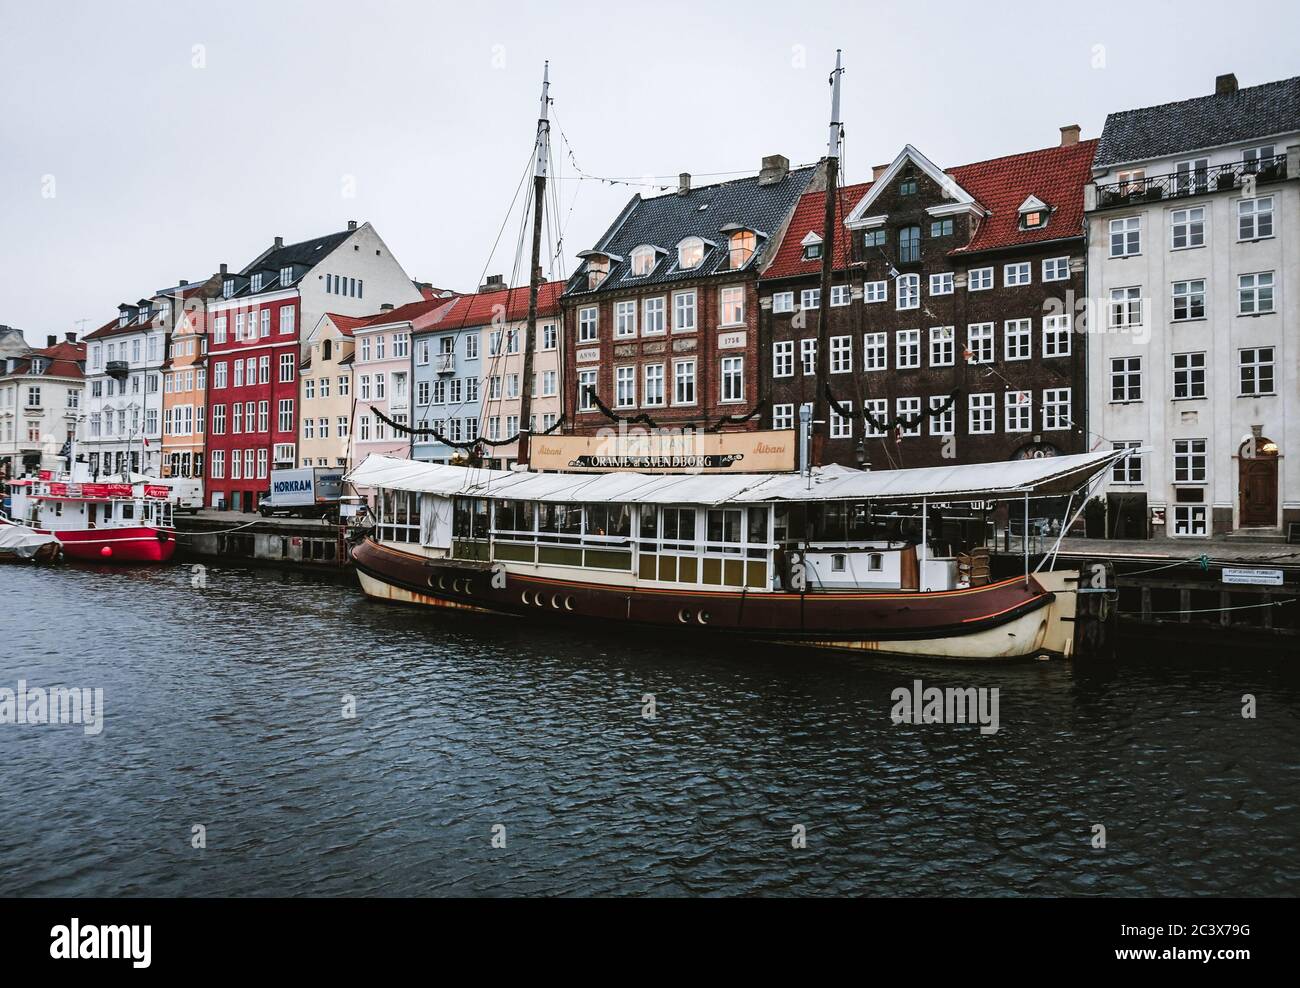 Copenhagen / Denmark - November 2019: Moody landscape at a picturesque Nyhavn harbor in the heart of Copenhagen. Colorful painted buildings and boats Stock Photo